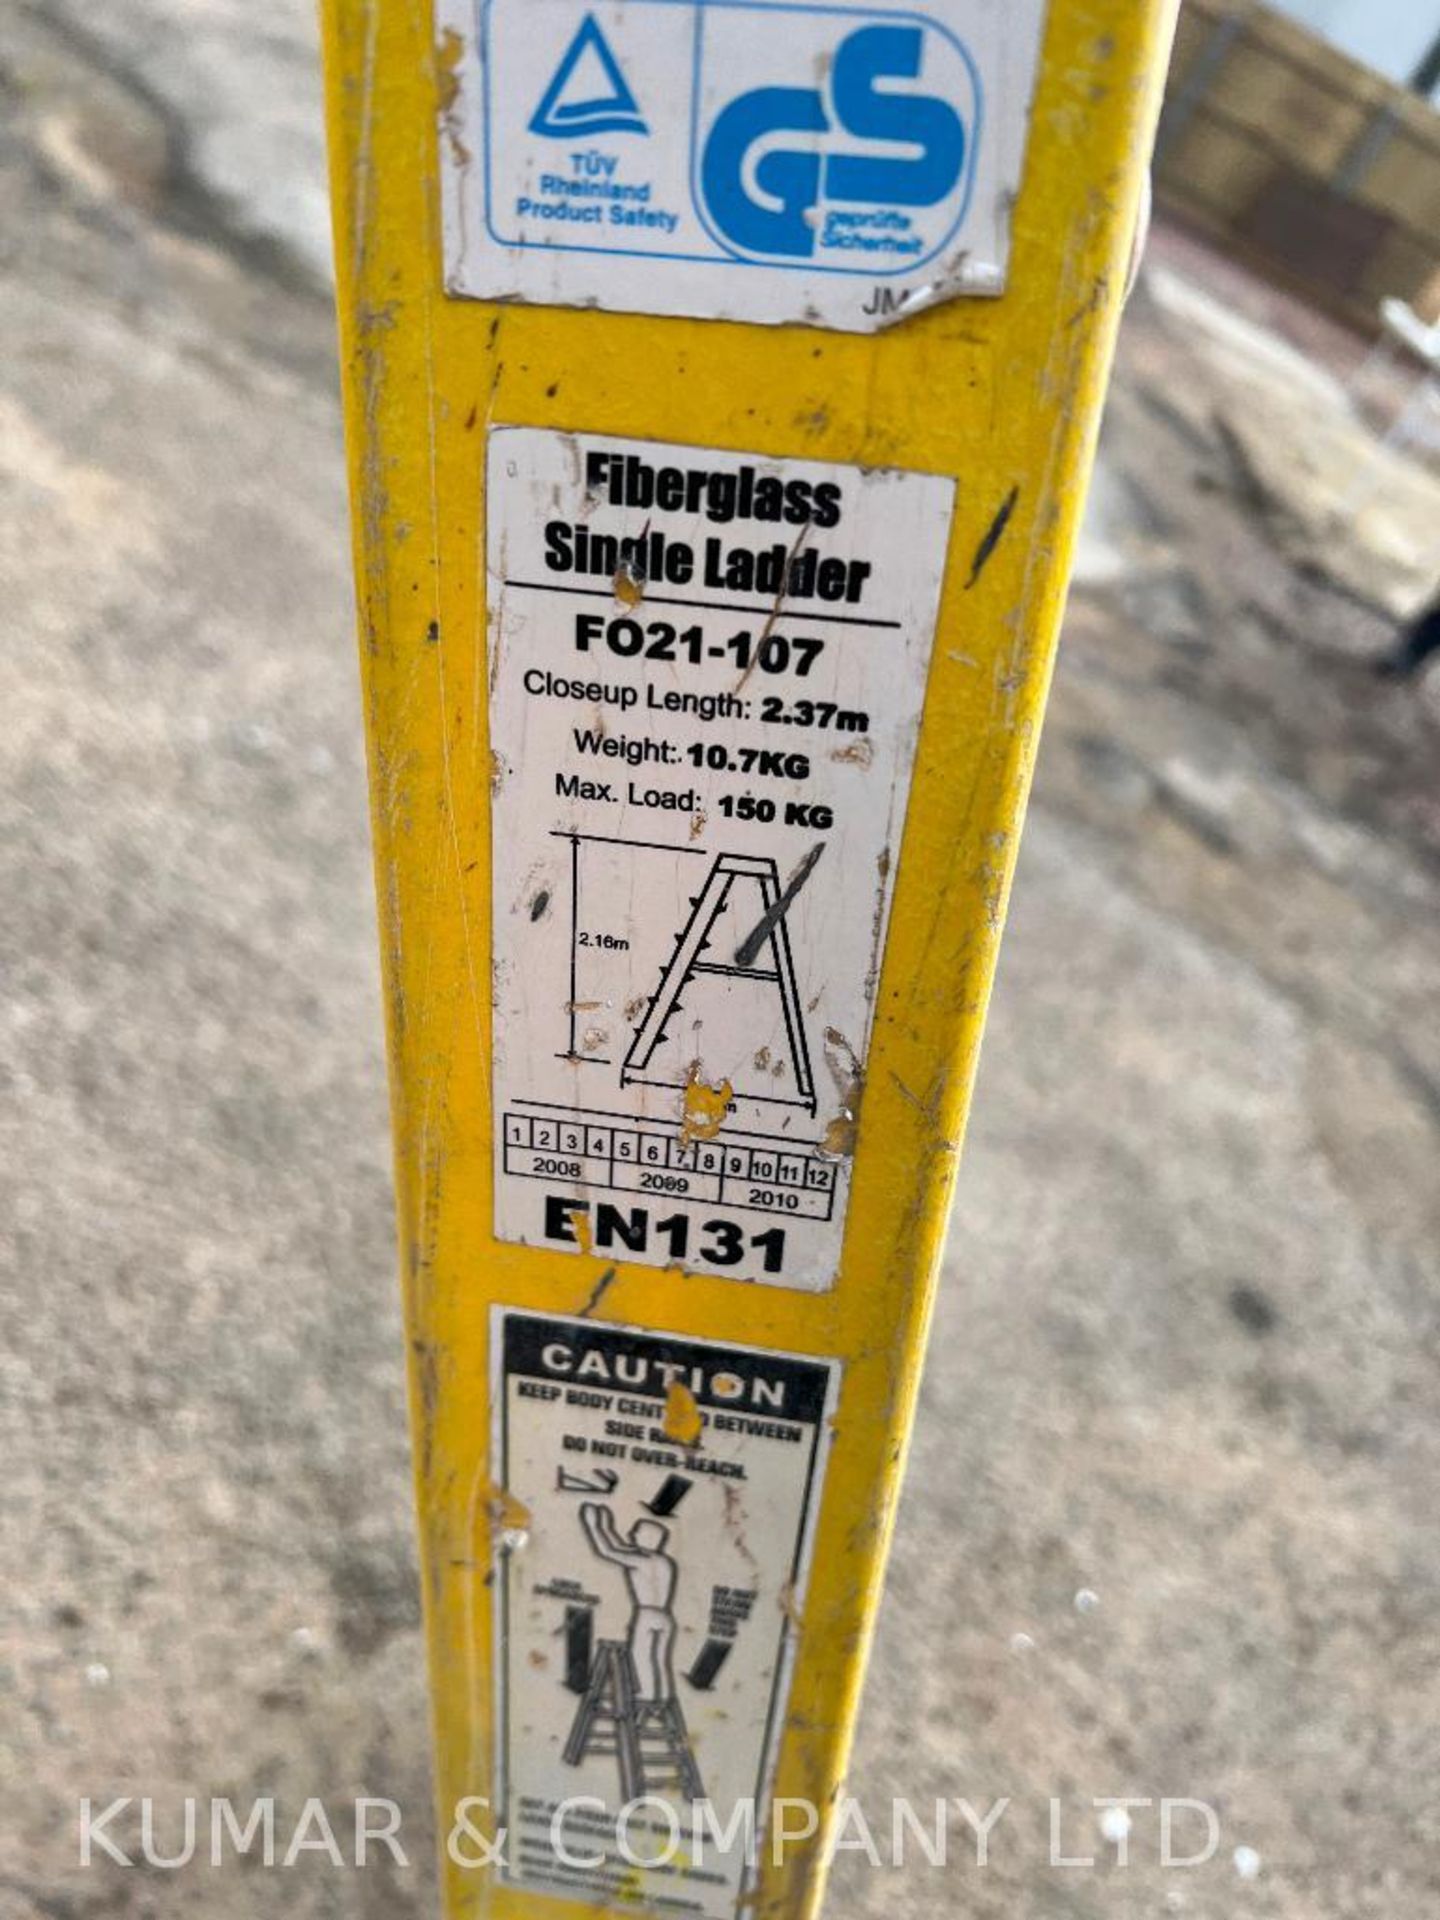 FO21-107 7 Step Fibreglass Single Ladder, EN131 Pro Certified PLEASE NOTE: THIS LOT IS LOCATED IN CA - Image 5 of 5